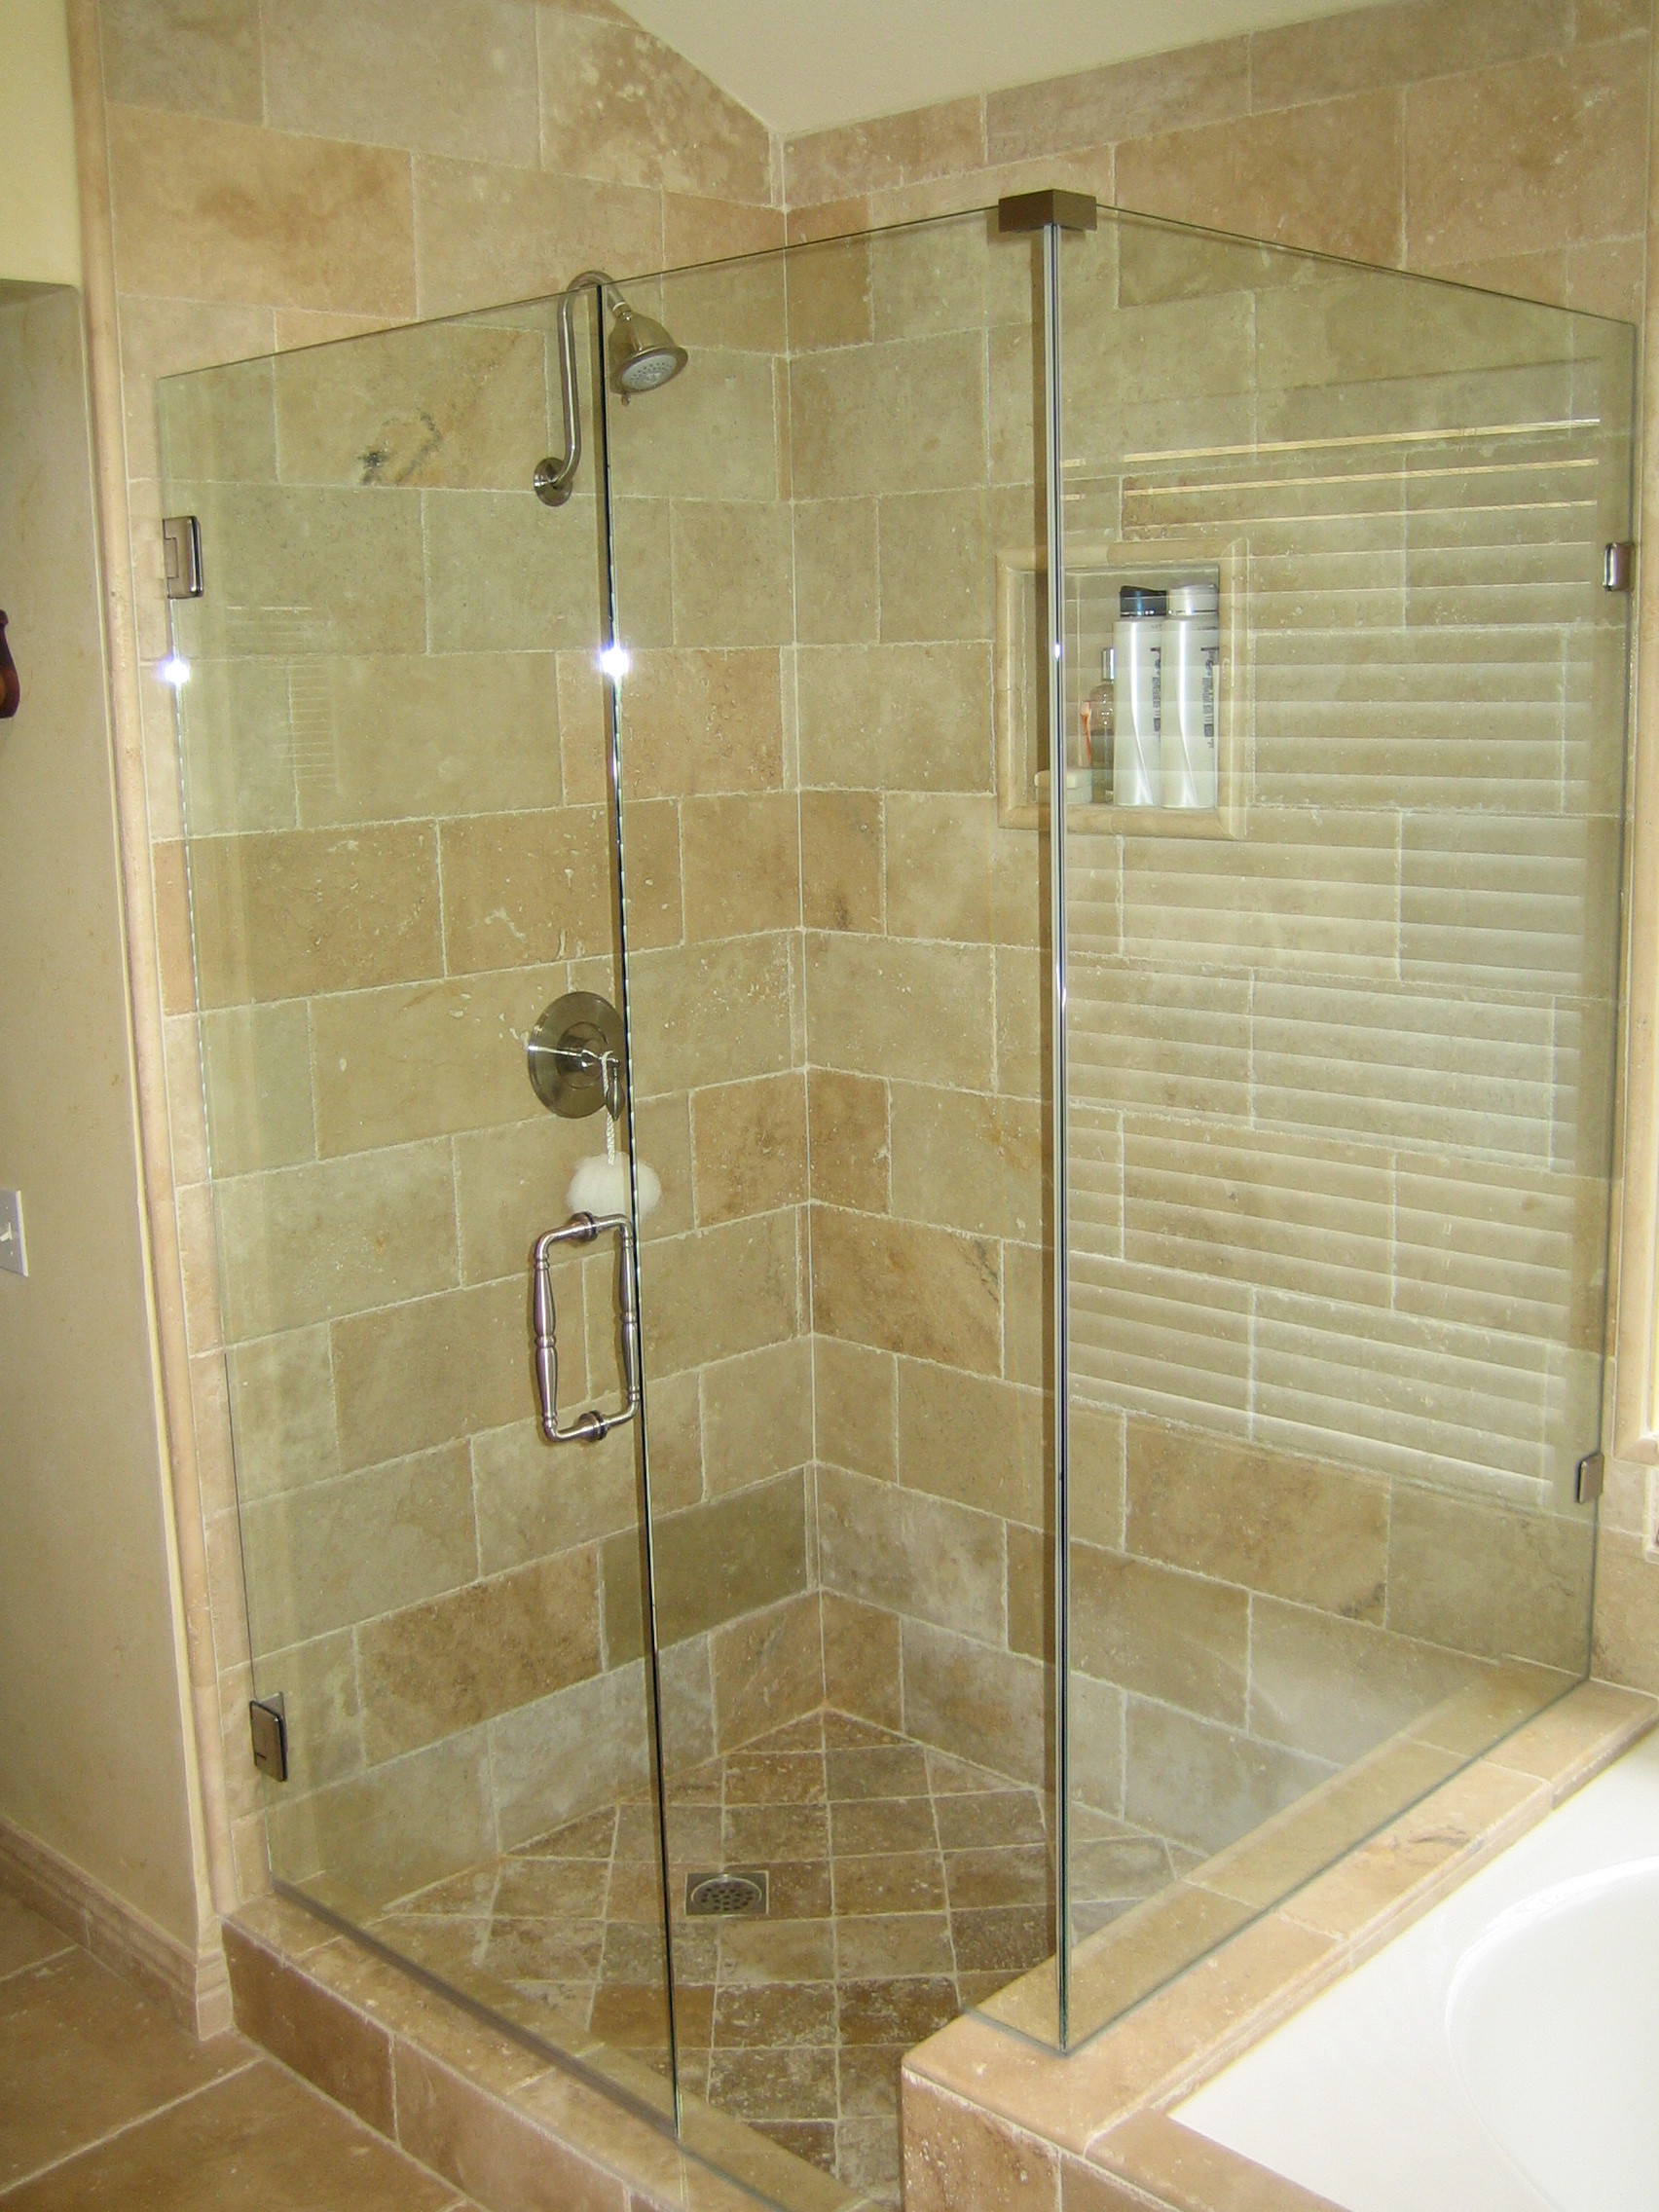 Bathroom Showers Pictures
 Some Things To Consider When Selecting Frameless Shower Doors